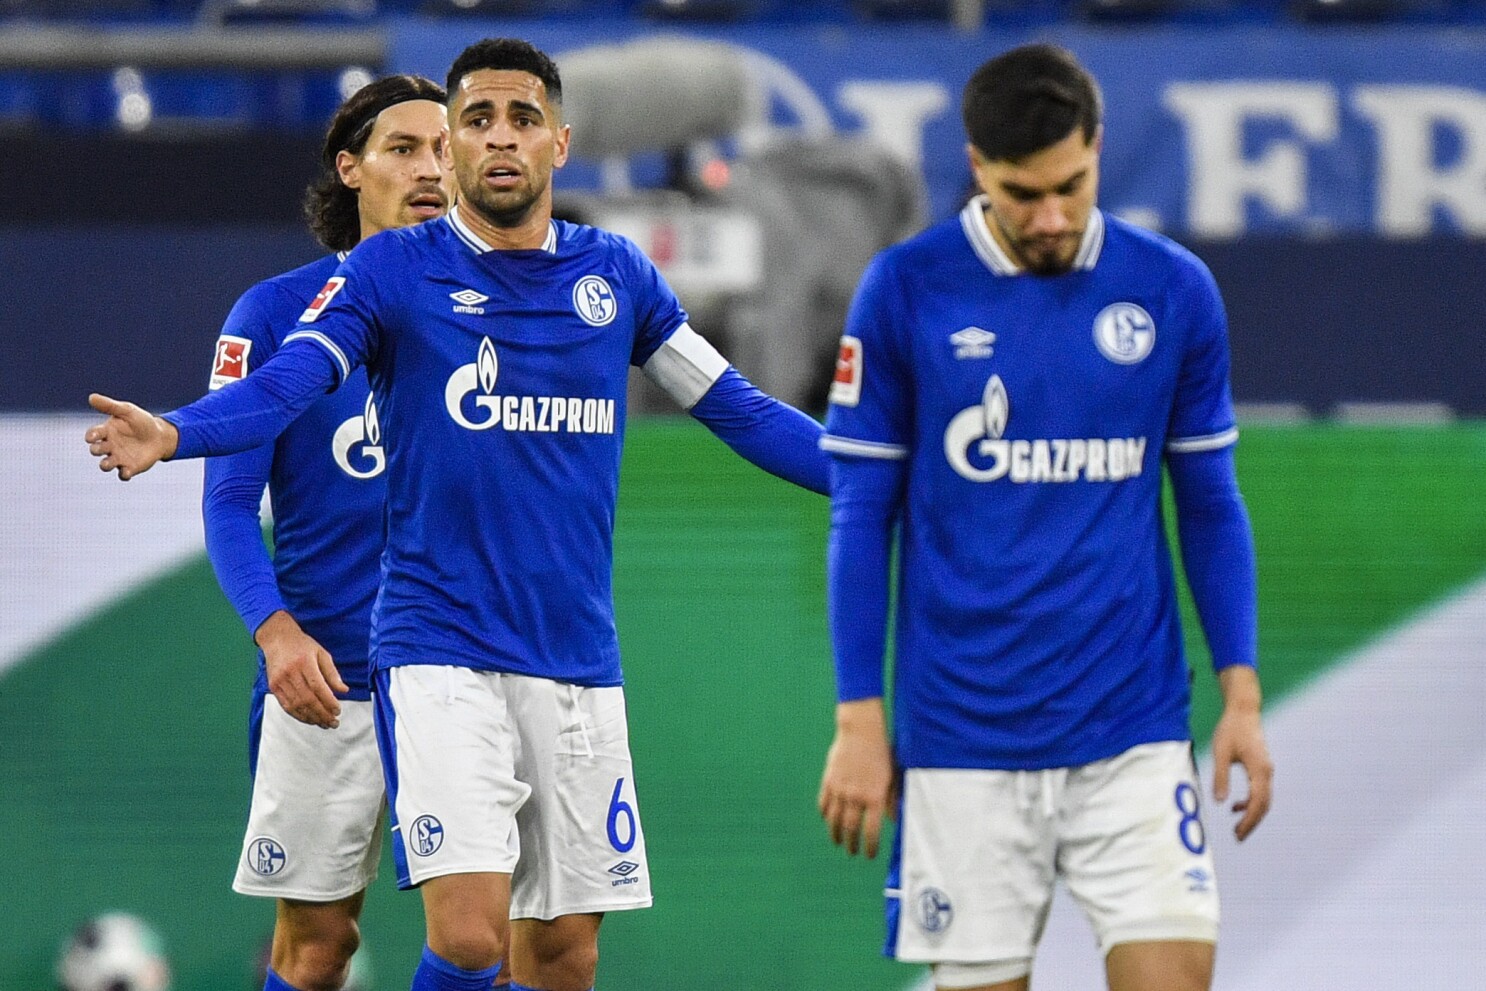 Last-place Schalke must overcome suspensions, injuries - The San Diego Union-Tribune